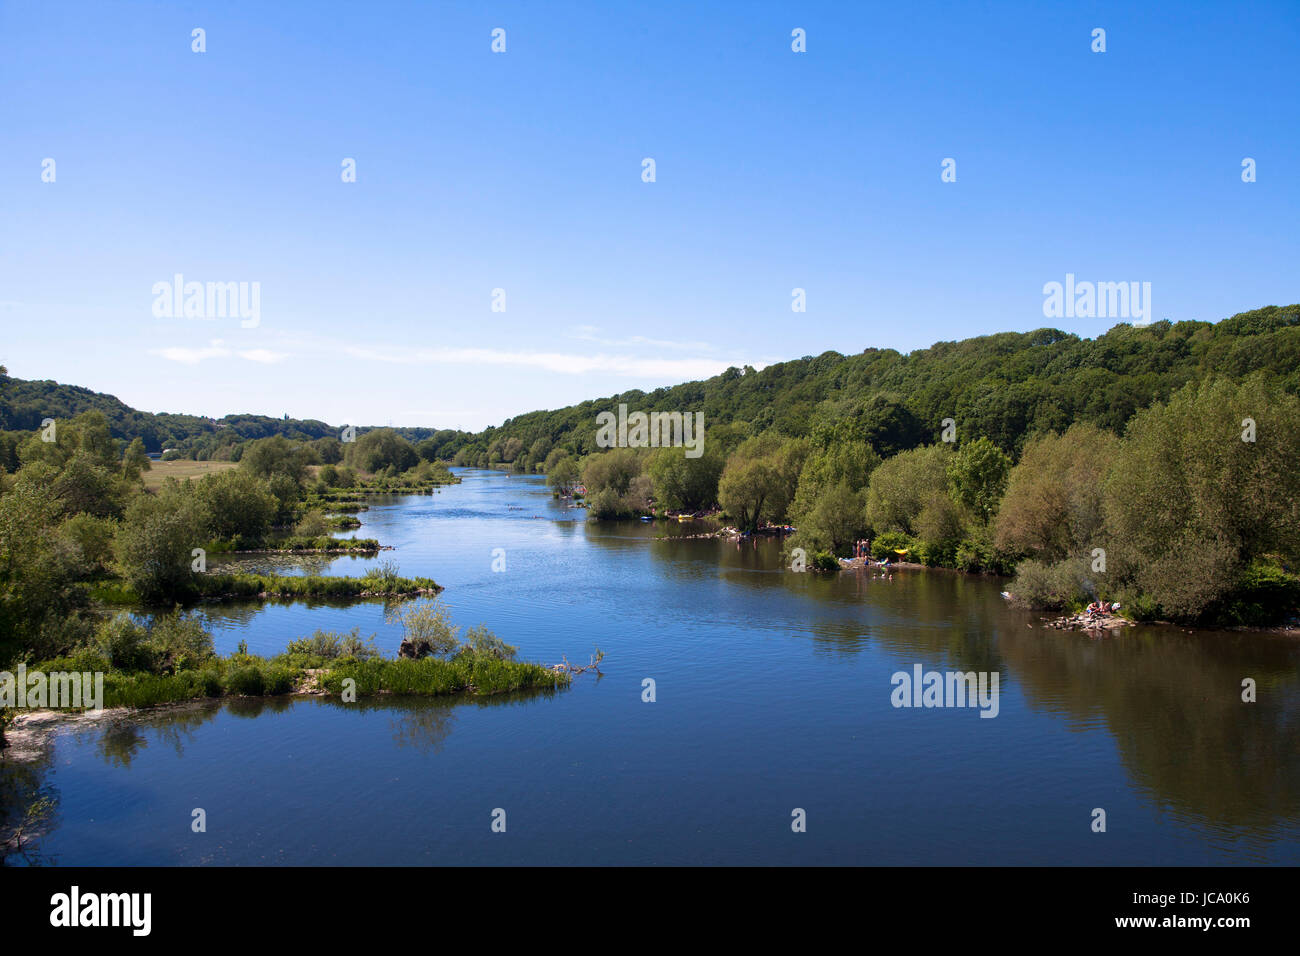 Germany, Ruhr area, the river Ruhr between Hattingen and Bochum. Stock Photo